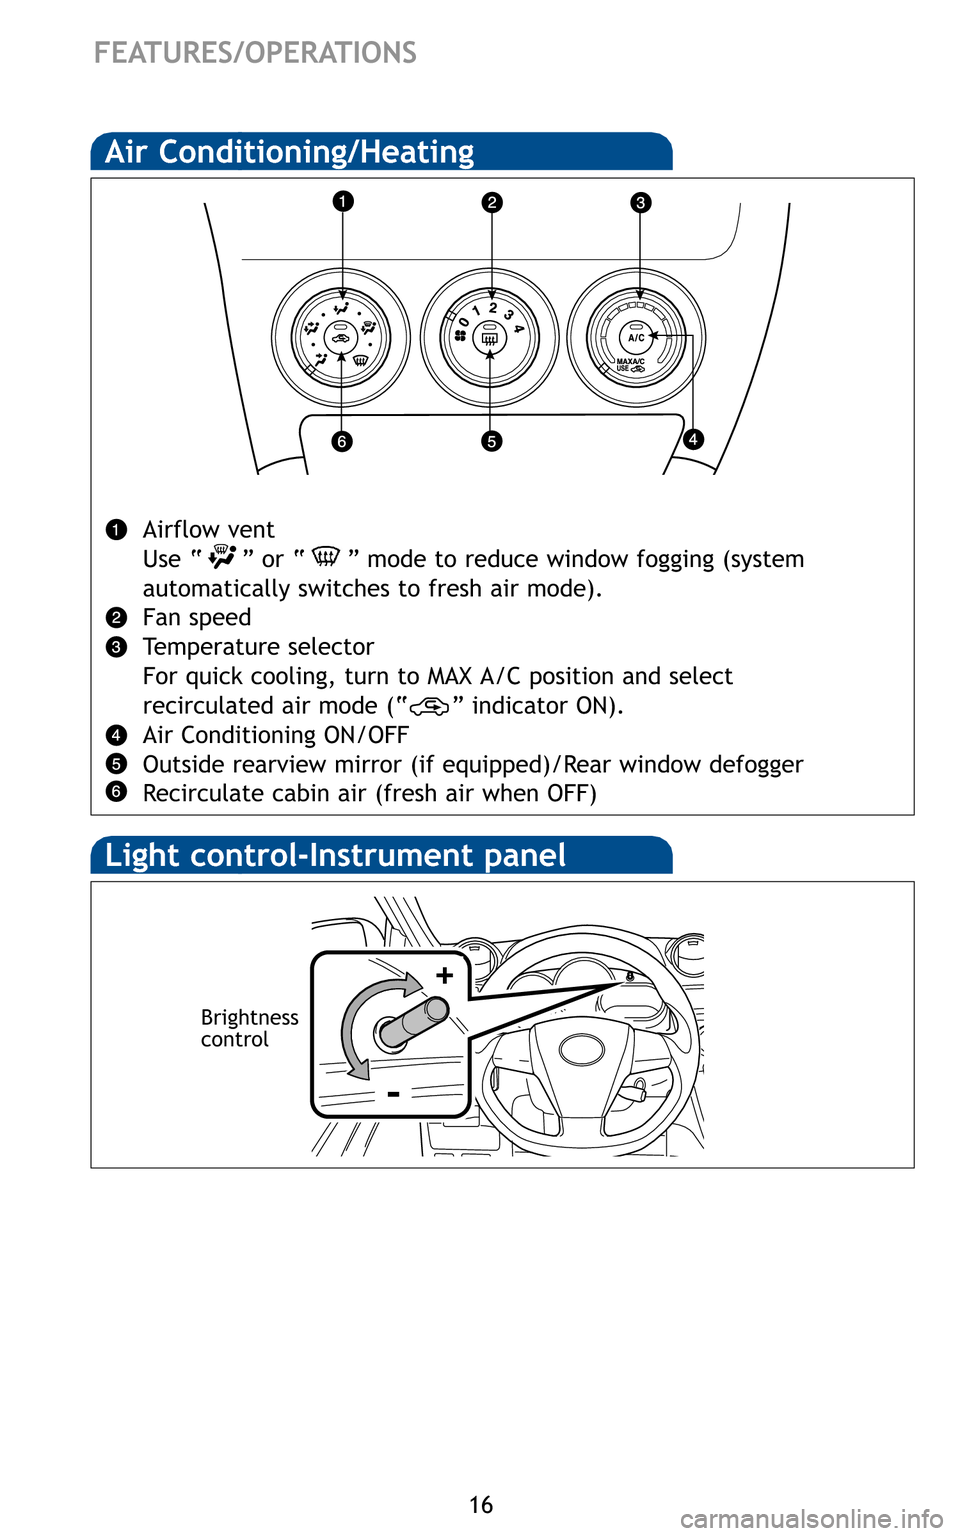 TOYOTA MATRIX 2011 E140 / 2.G Quick Reference Guide 16
FEATURES/OPERATIONS

Airflow vent 
Use “ ” or “ ” mode to reduce window fogging (system
automatically switches to fresh air mode).
Fan speed 
Temperature selector
For quick cooling, turn to